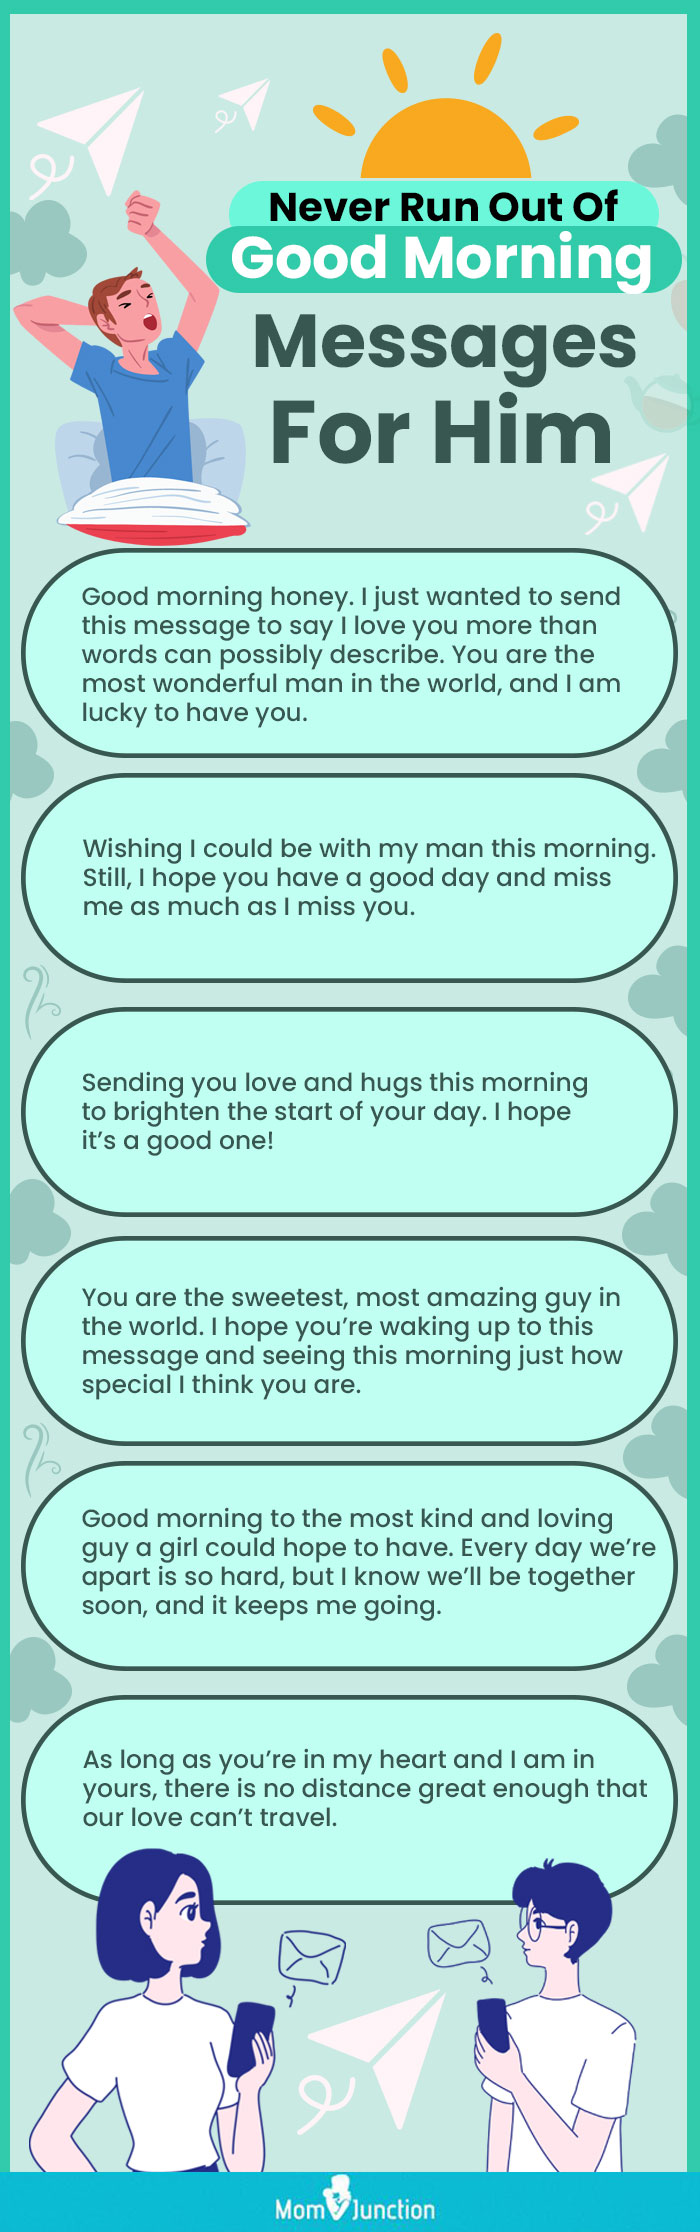 good morning messages for him (infographic)